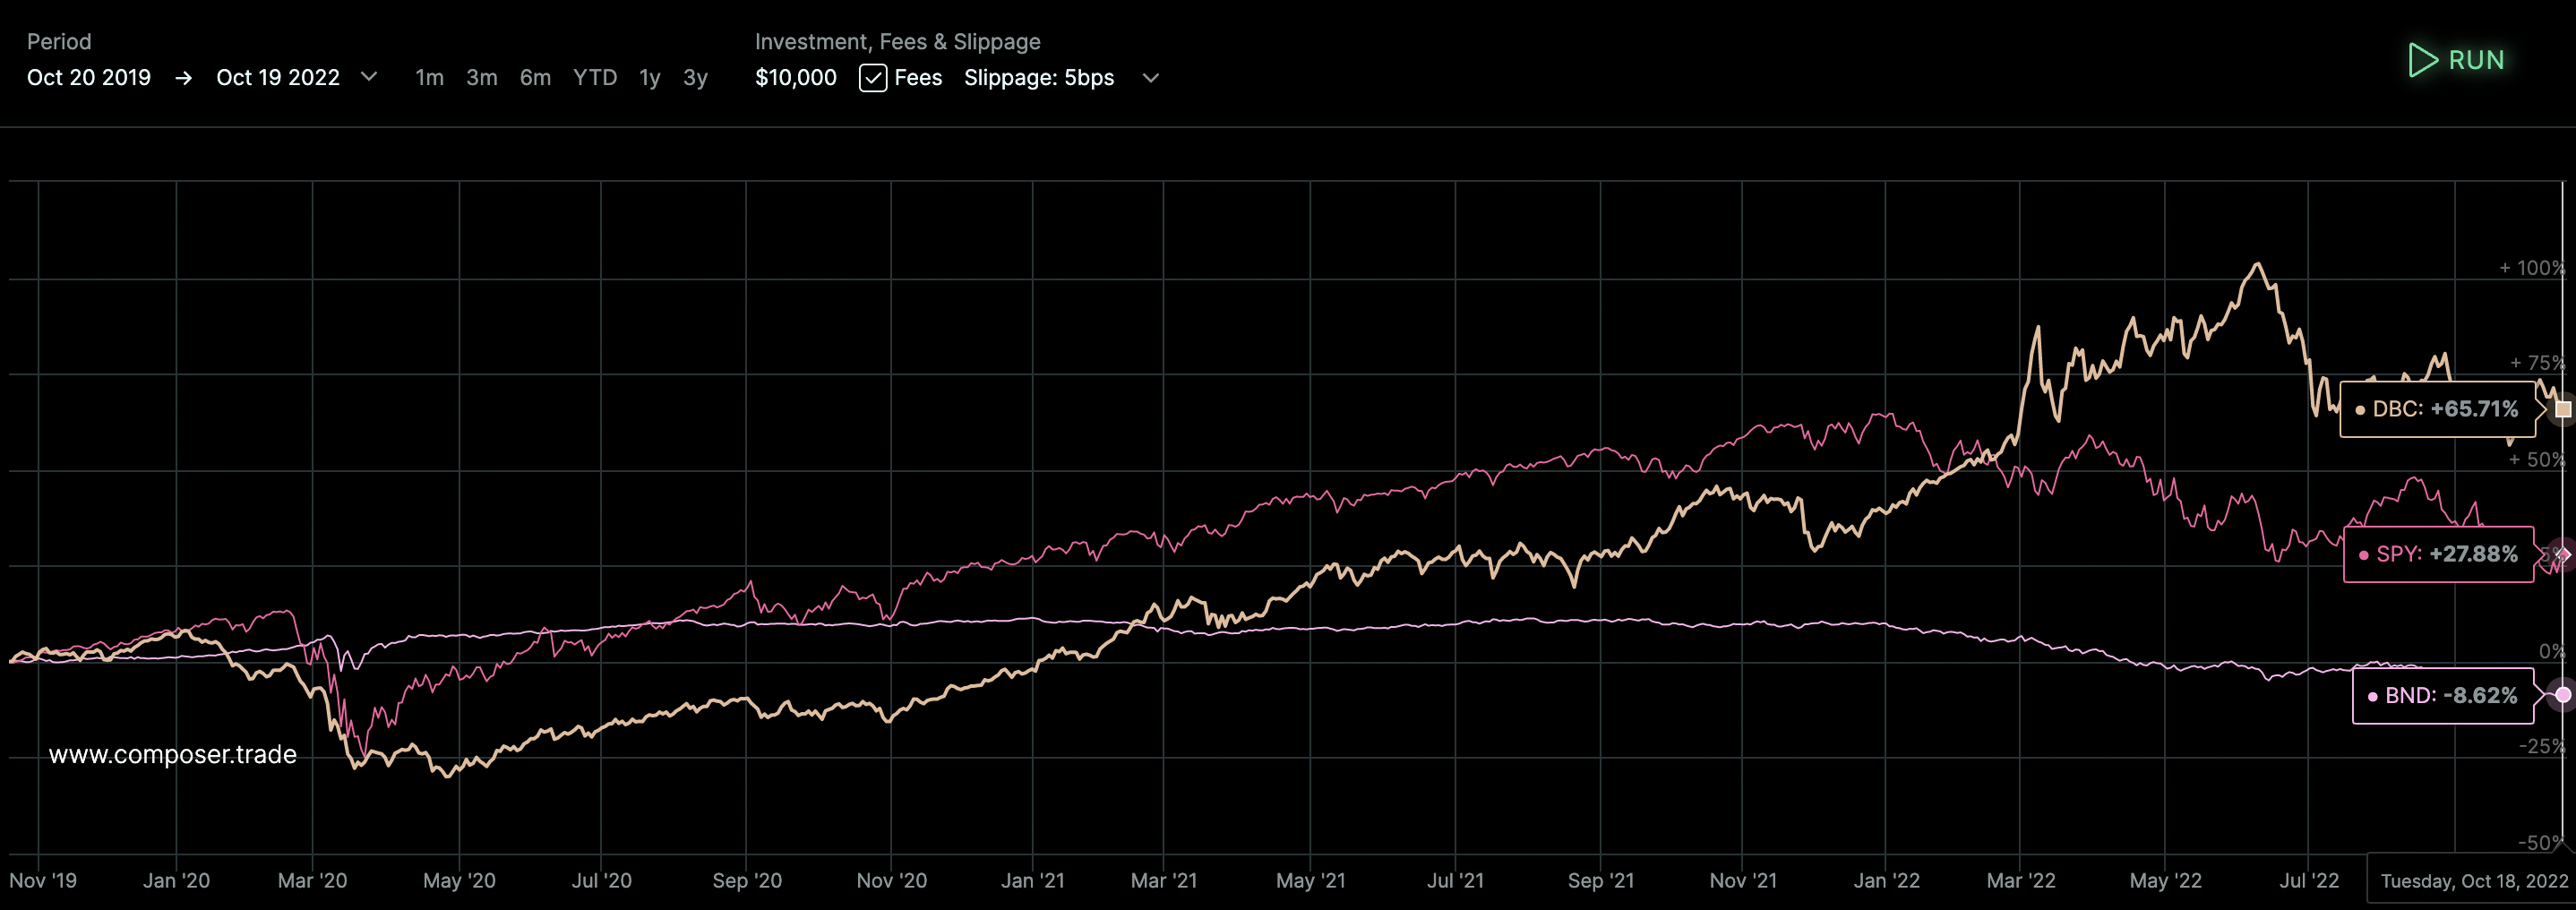 Invesco's DBC ETF performance compared to SPY and BND over a three-year period.